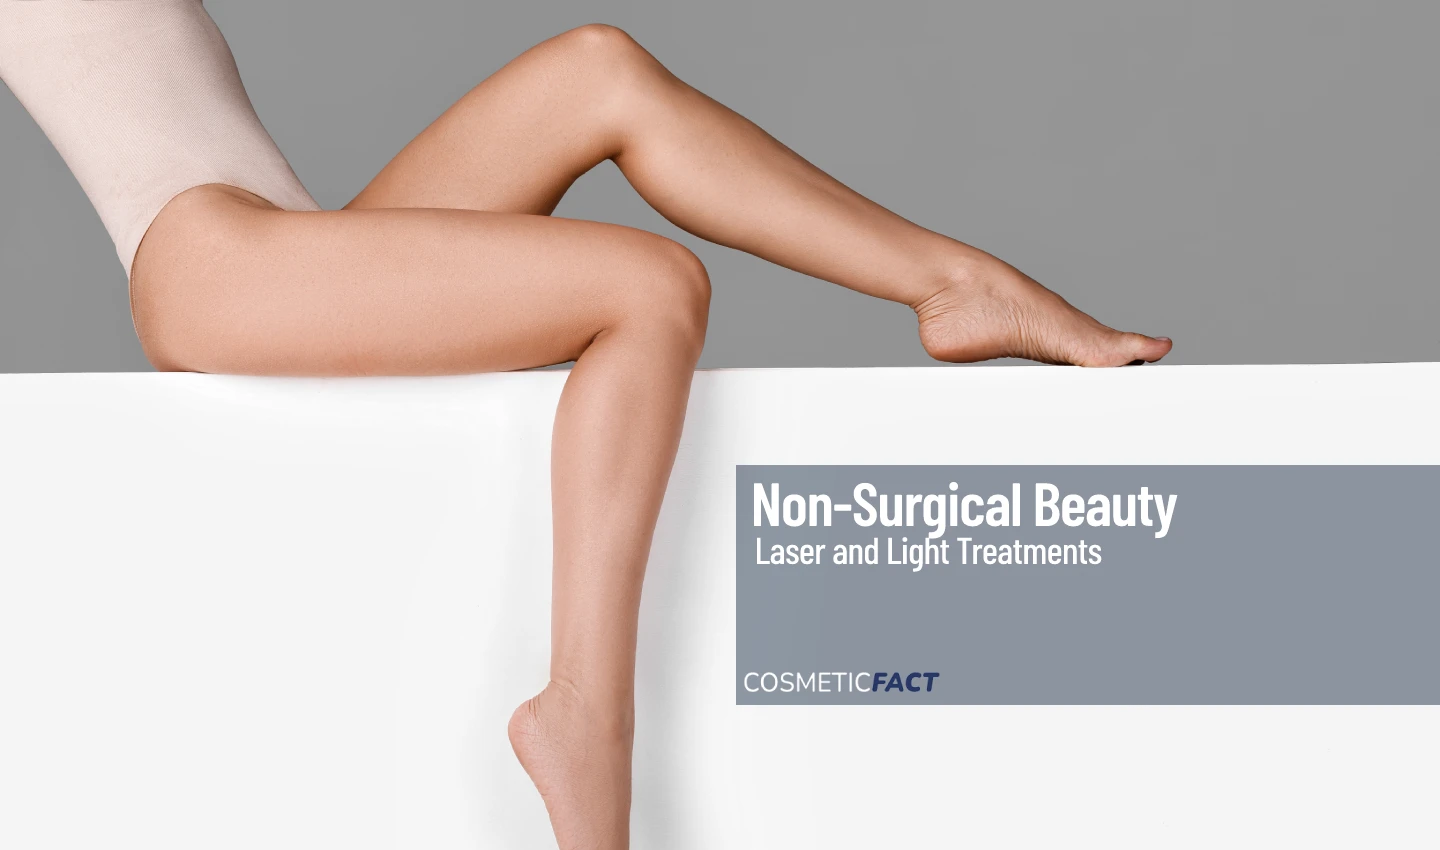 A woman showing off her beautiful legs, representing the effectiveness of laser vein treatments in removing unsightly veins.